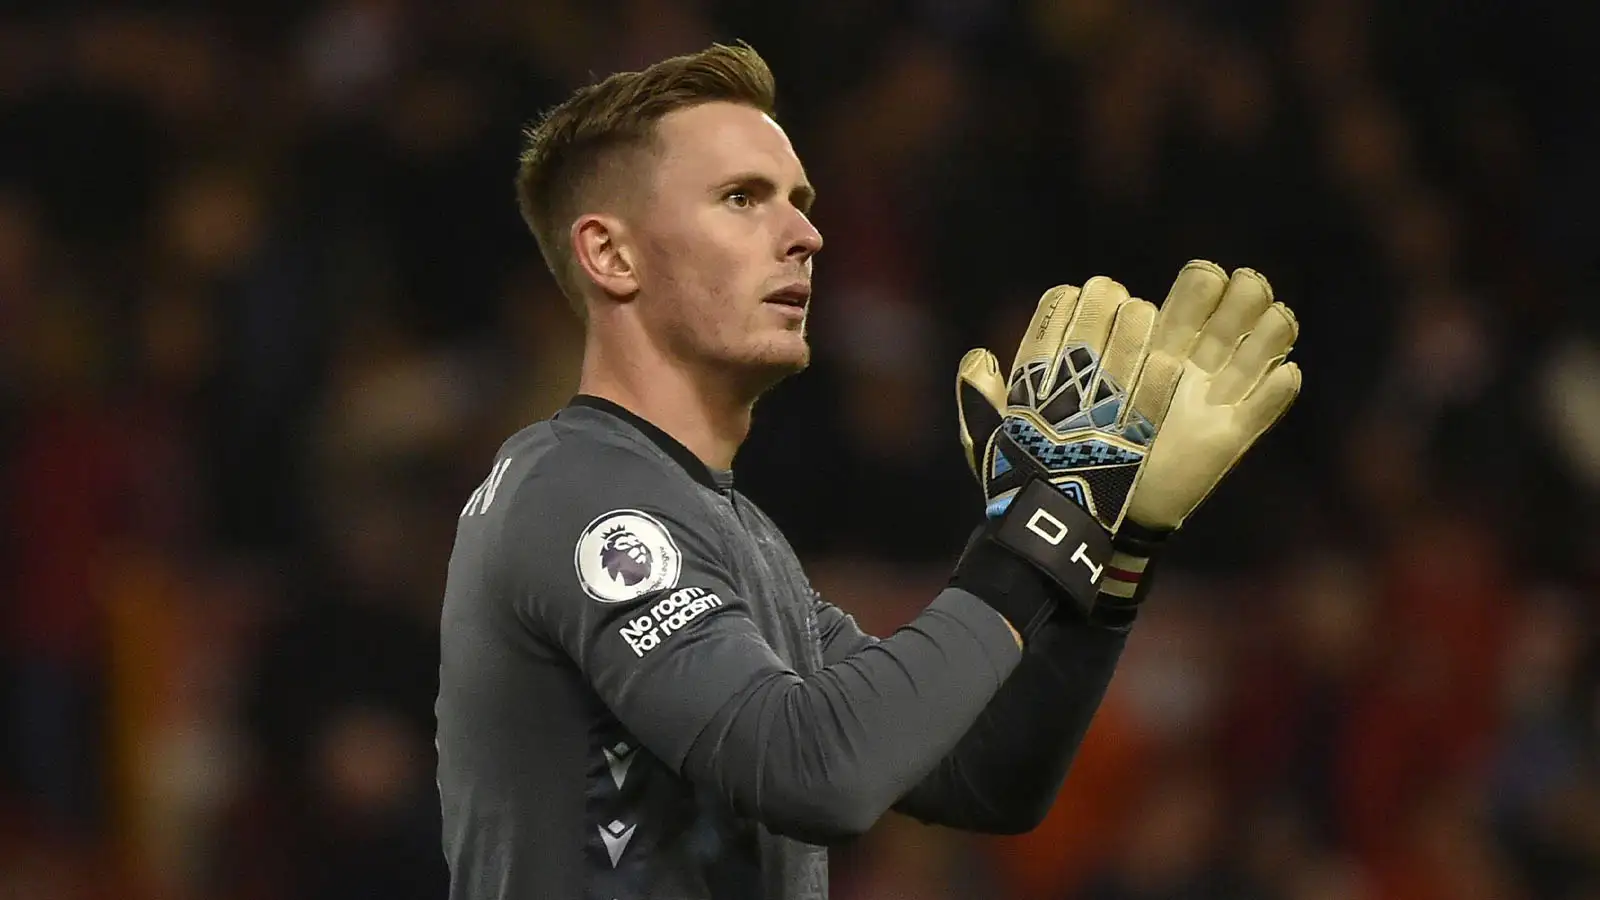 Nottingham Forest's goalkeeper Dean Henderson applauds the fans at the end of the English Premier League soccer match between Nottingham Forest and Aston Villa at the City ground in Nottingham, England